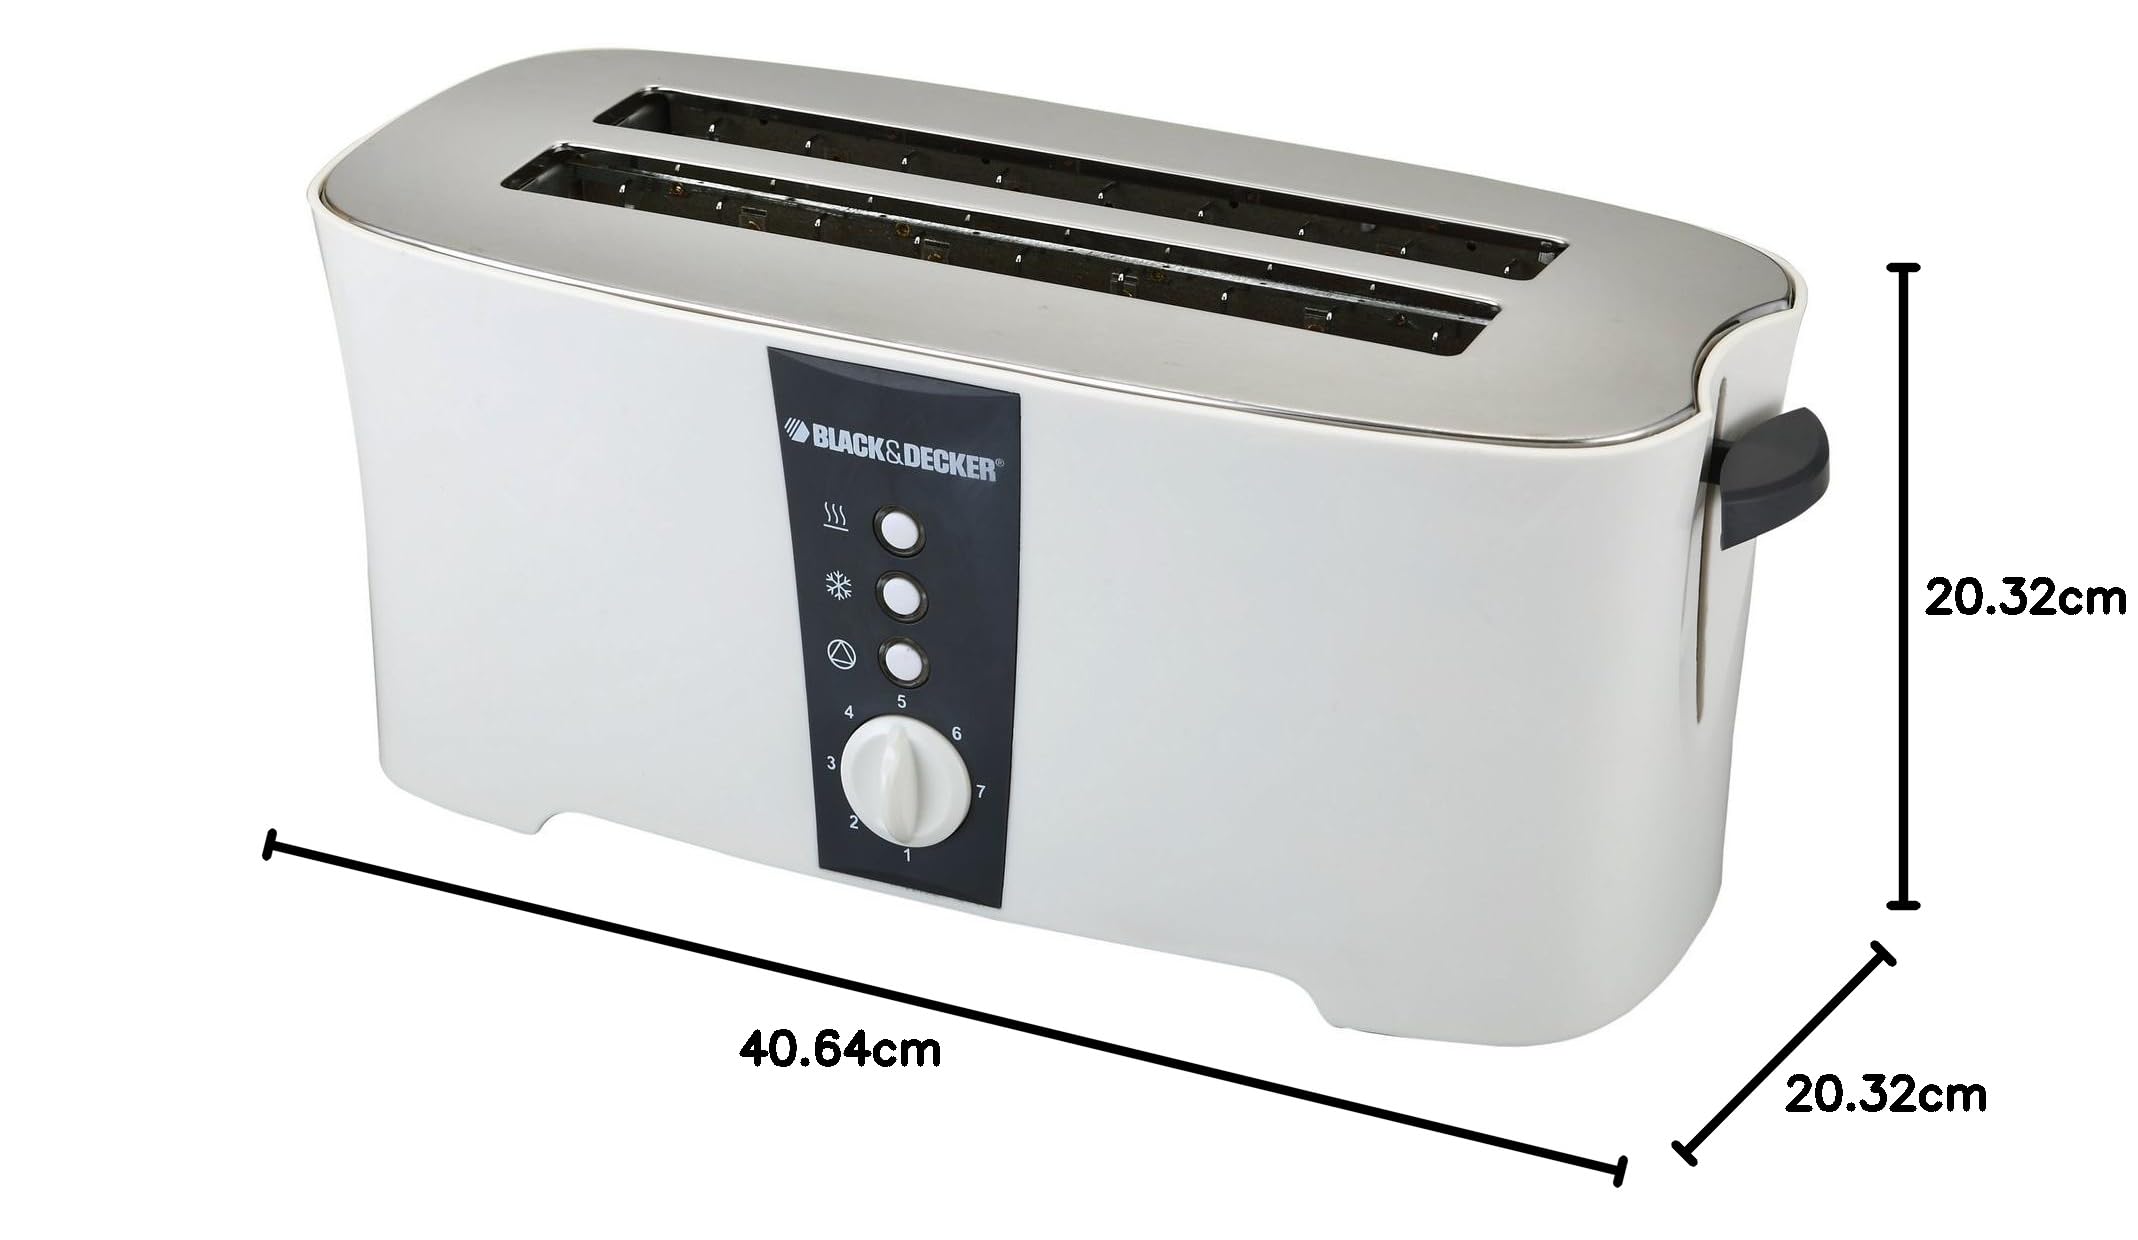 Black & Decker 1350W 4 Slice cool touch Toaster with Electronic Browning Control White